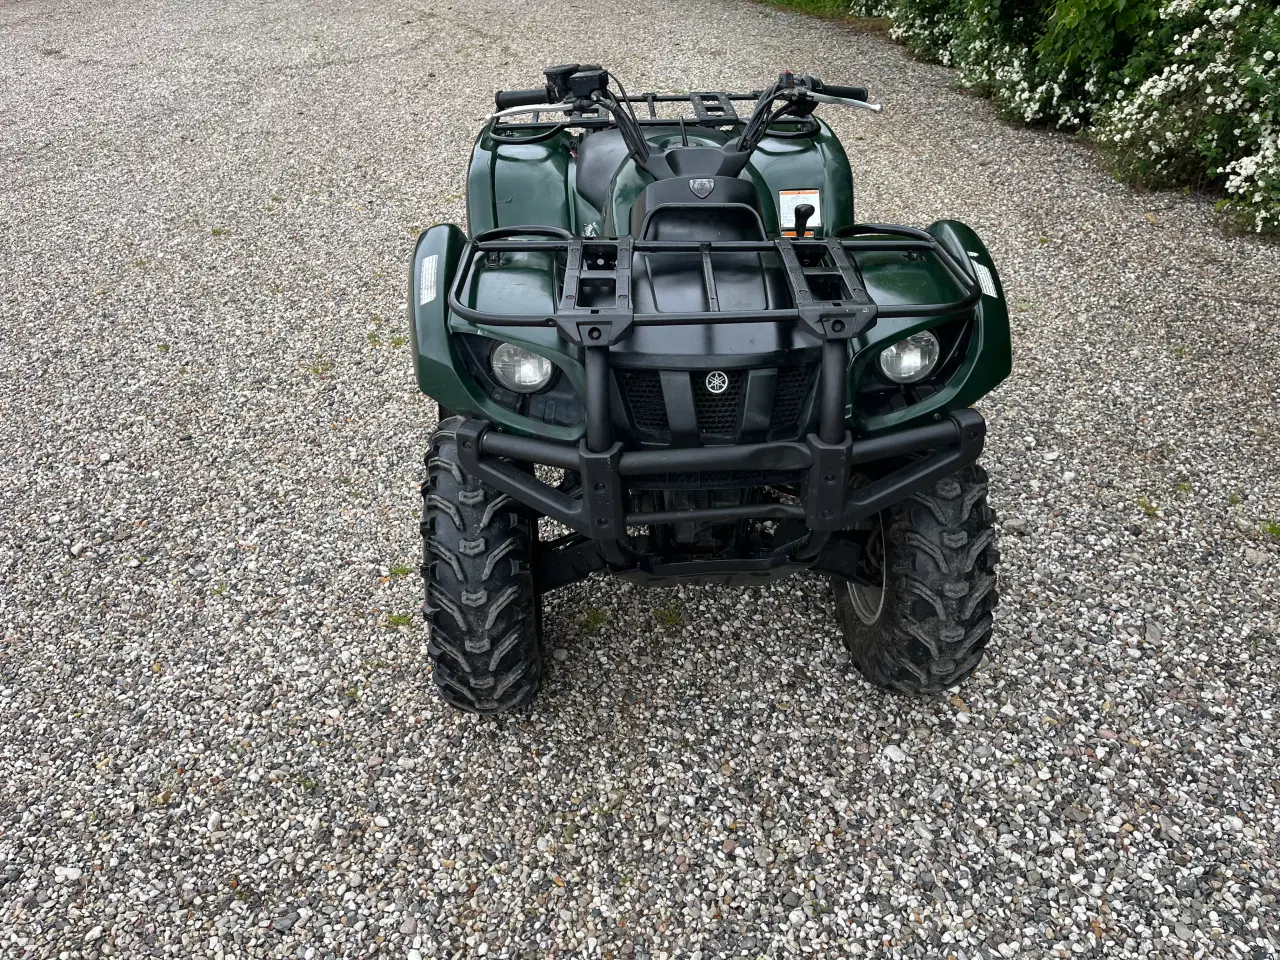 Billede 1 - Yamaha Grizzly 660